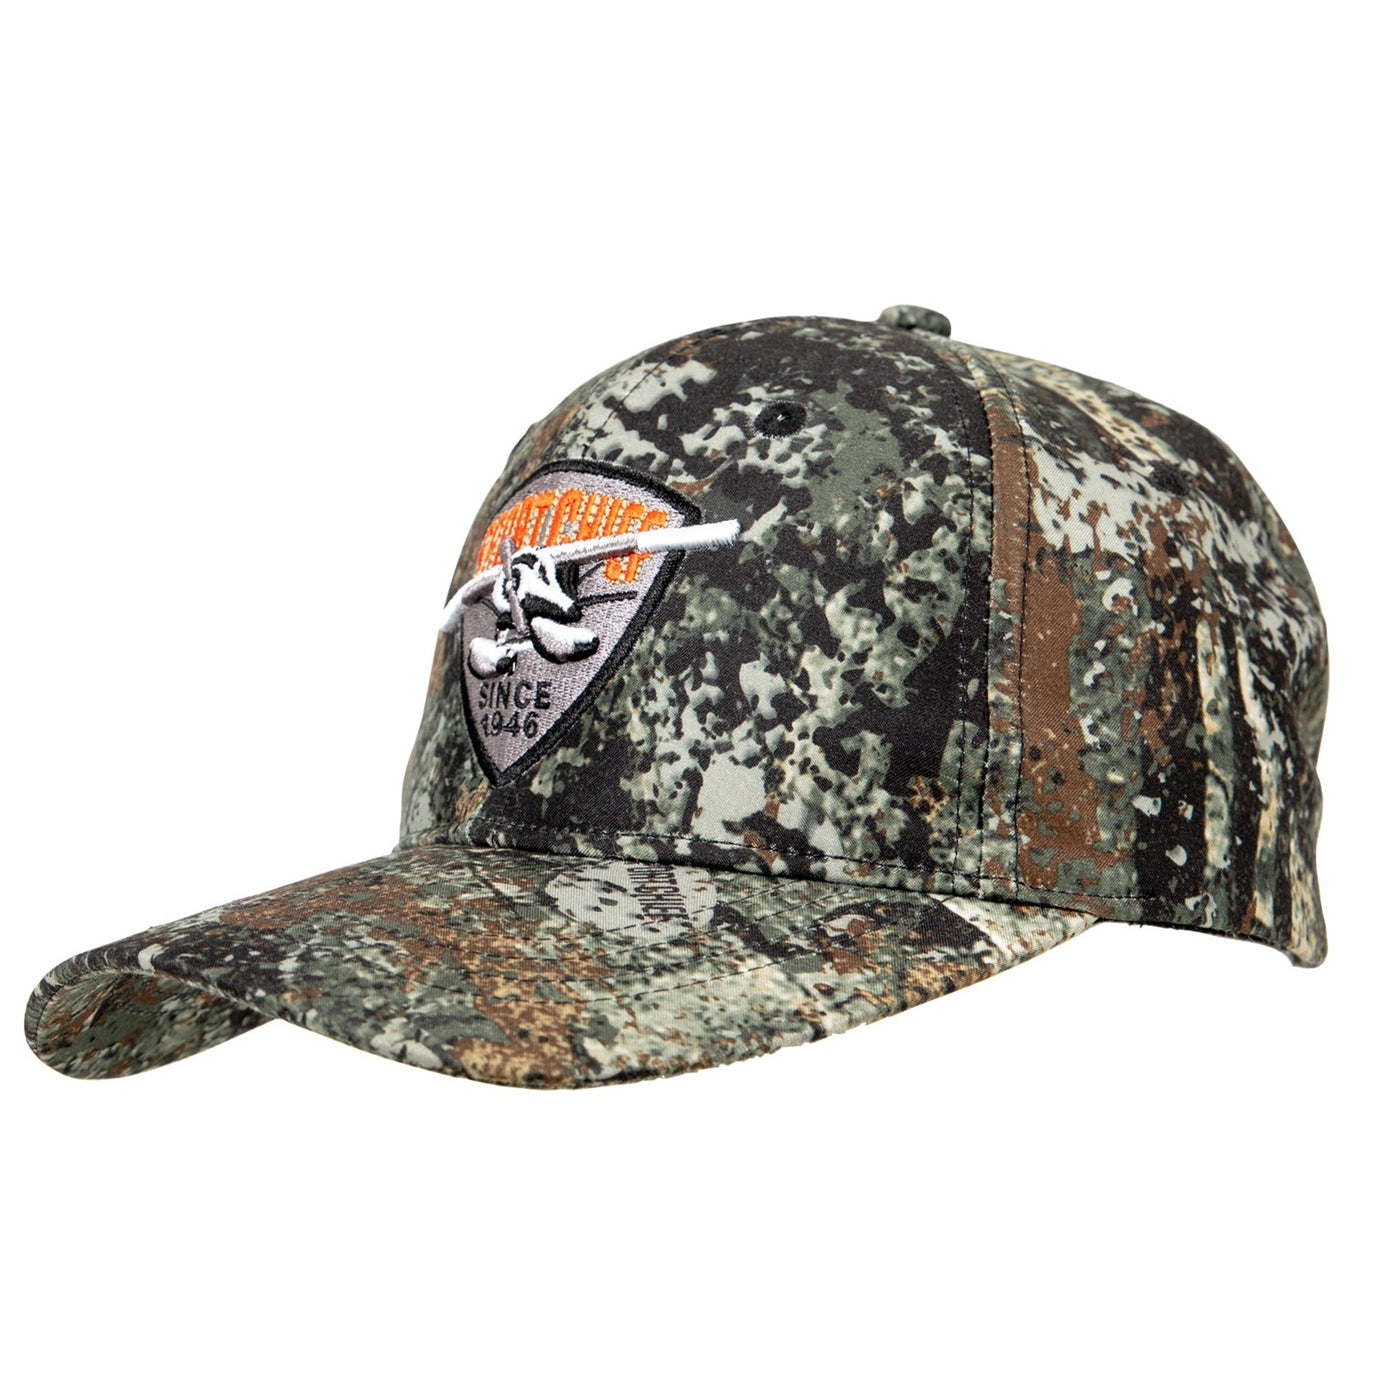 Casquette homme chasse camo The Ripper  - Sportchief